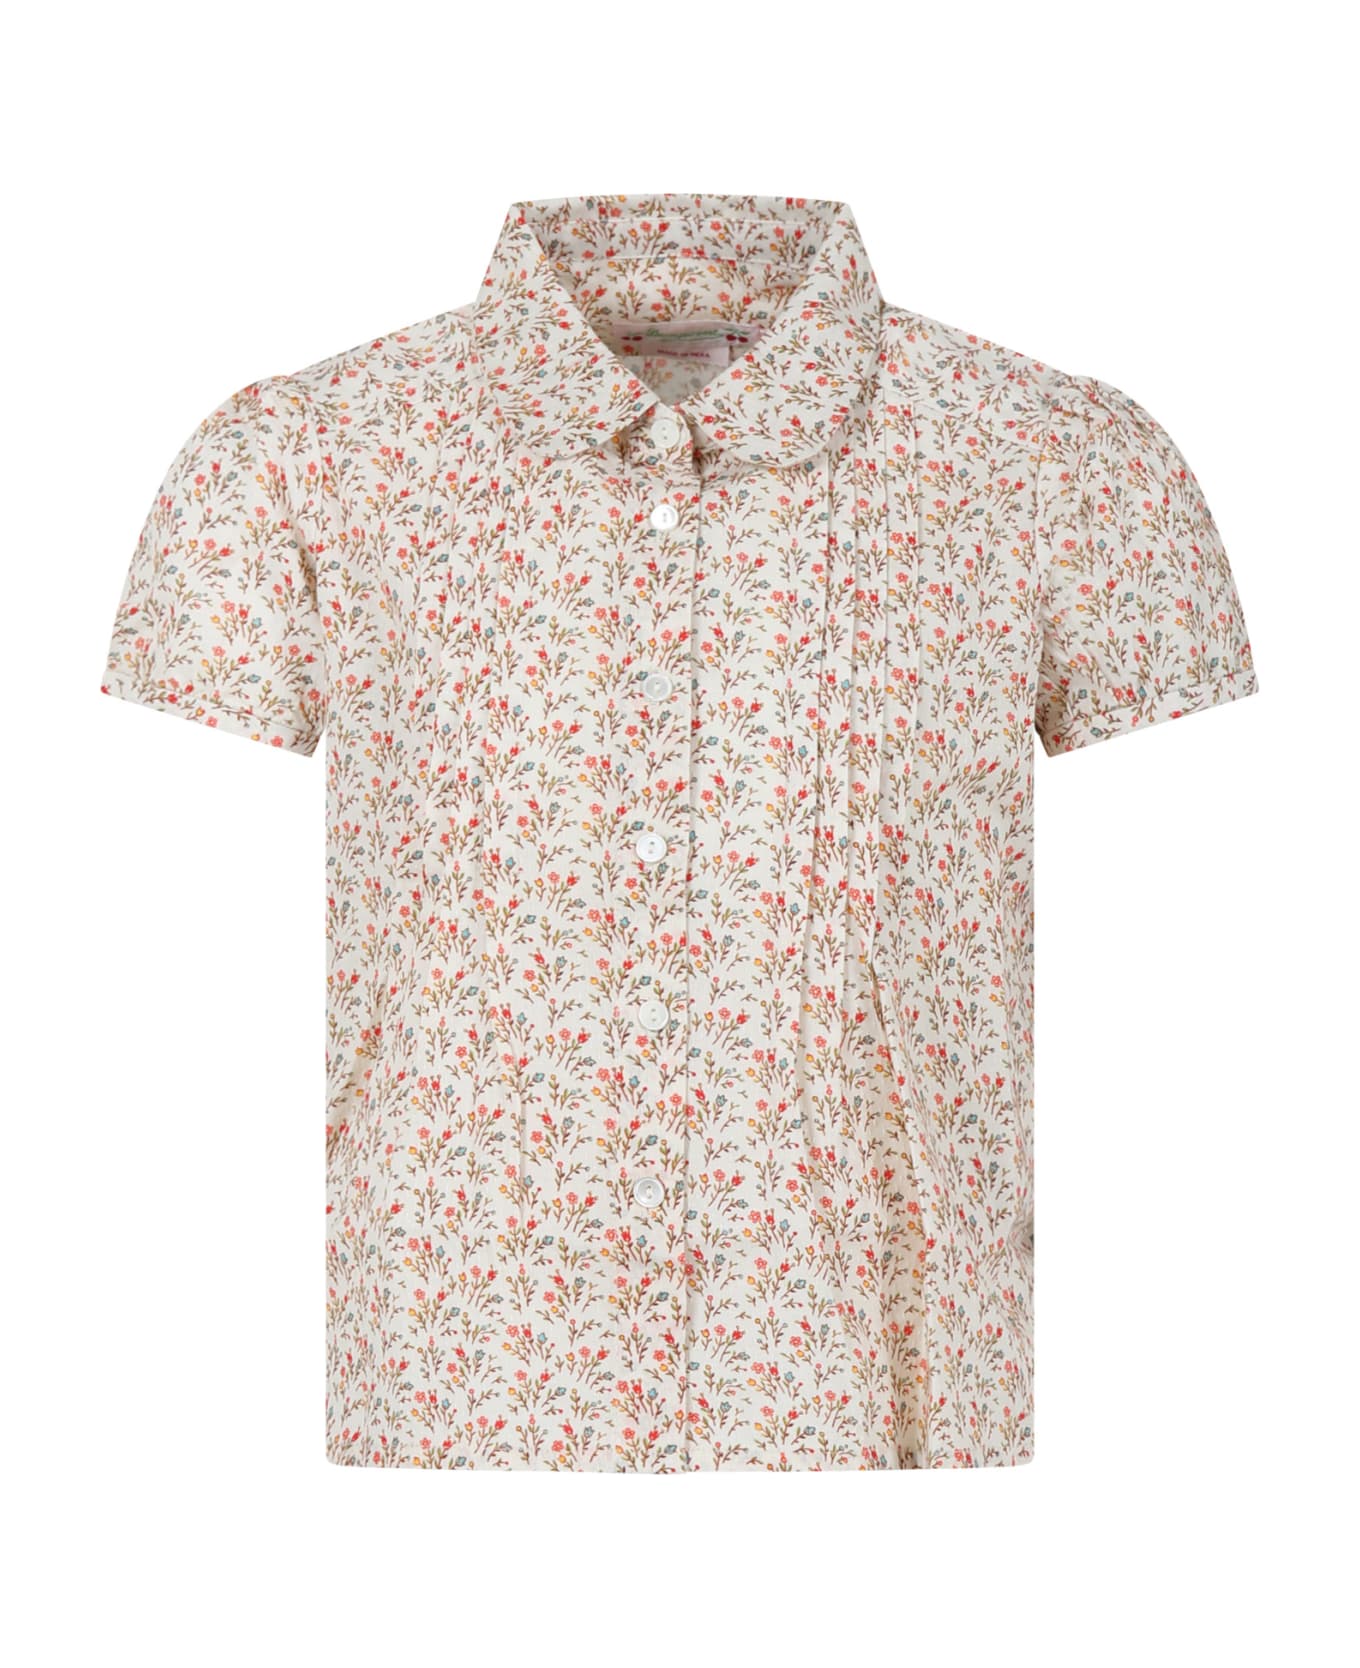 Bonpoint Beige Shirt For Girl With Floral Print - Beige シャツ